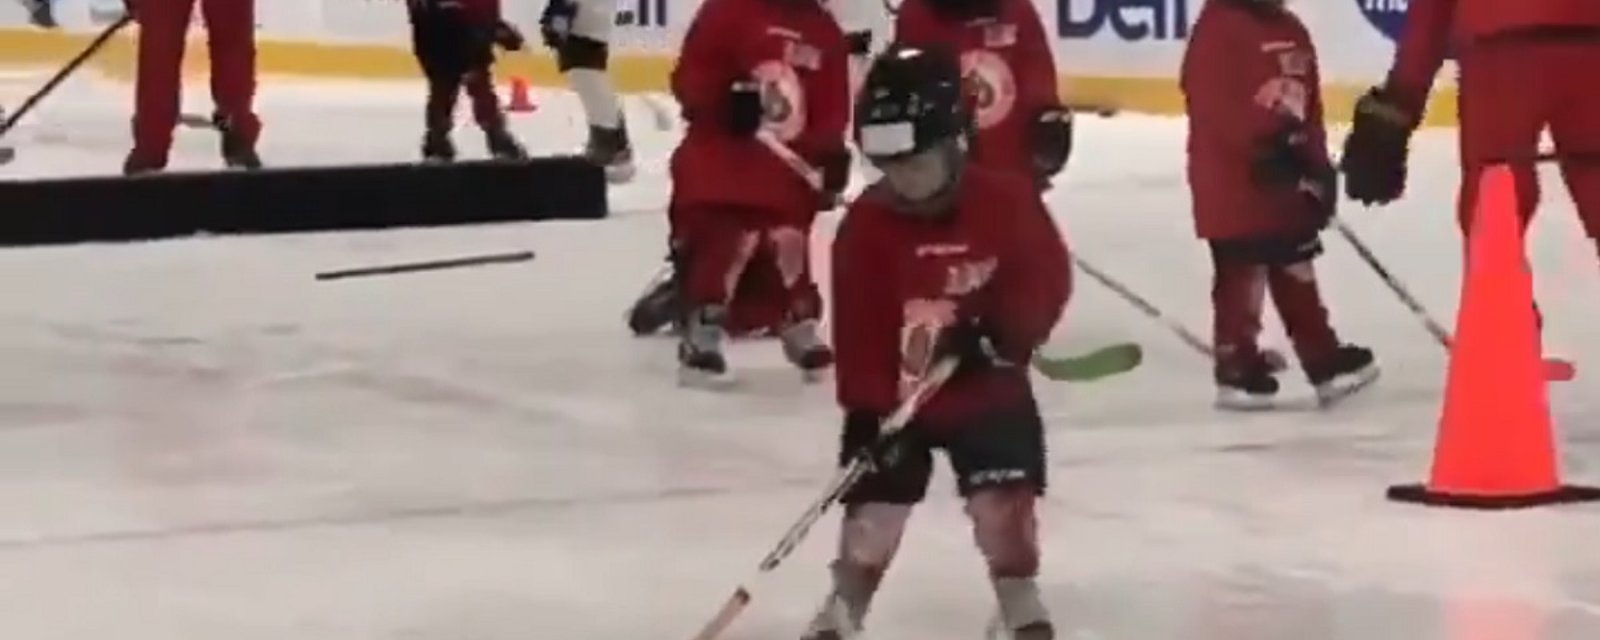 Little hockey player's goal celebration might be the cutest moment of the year.